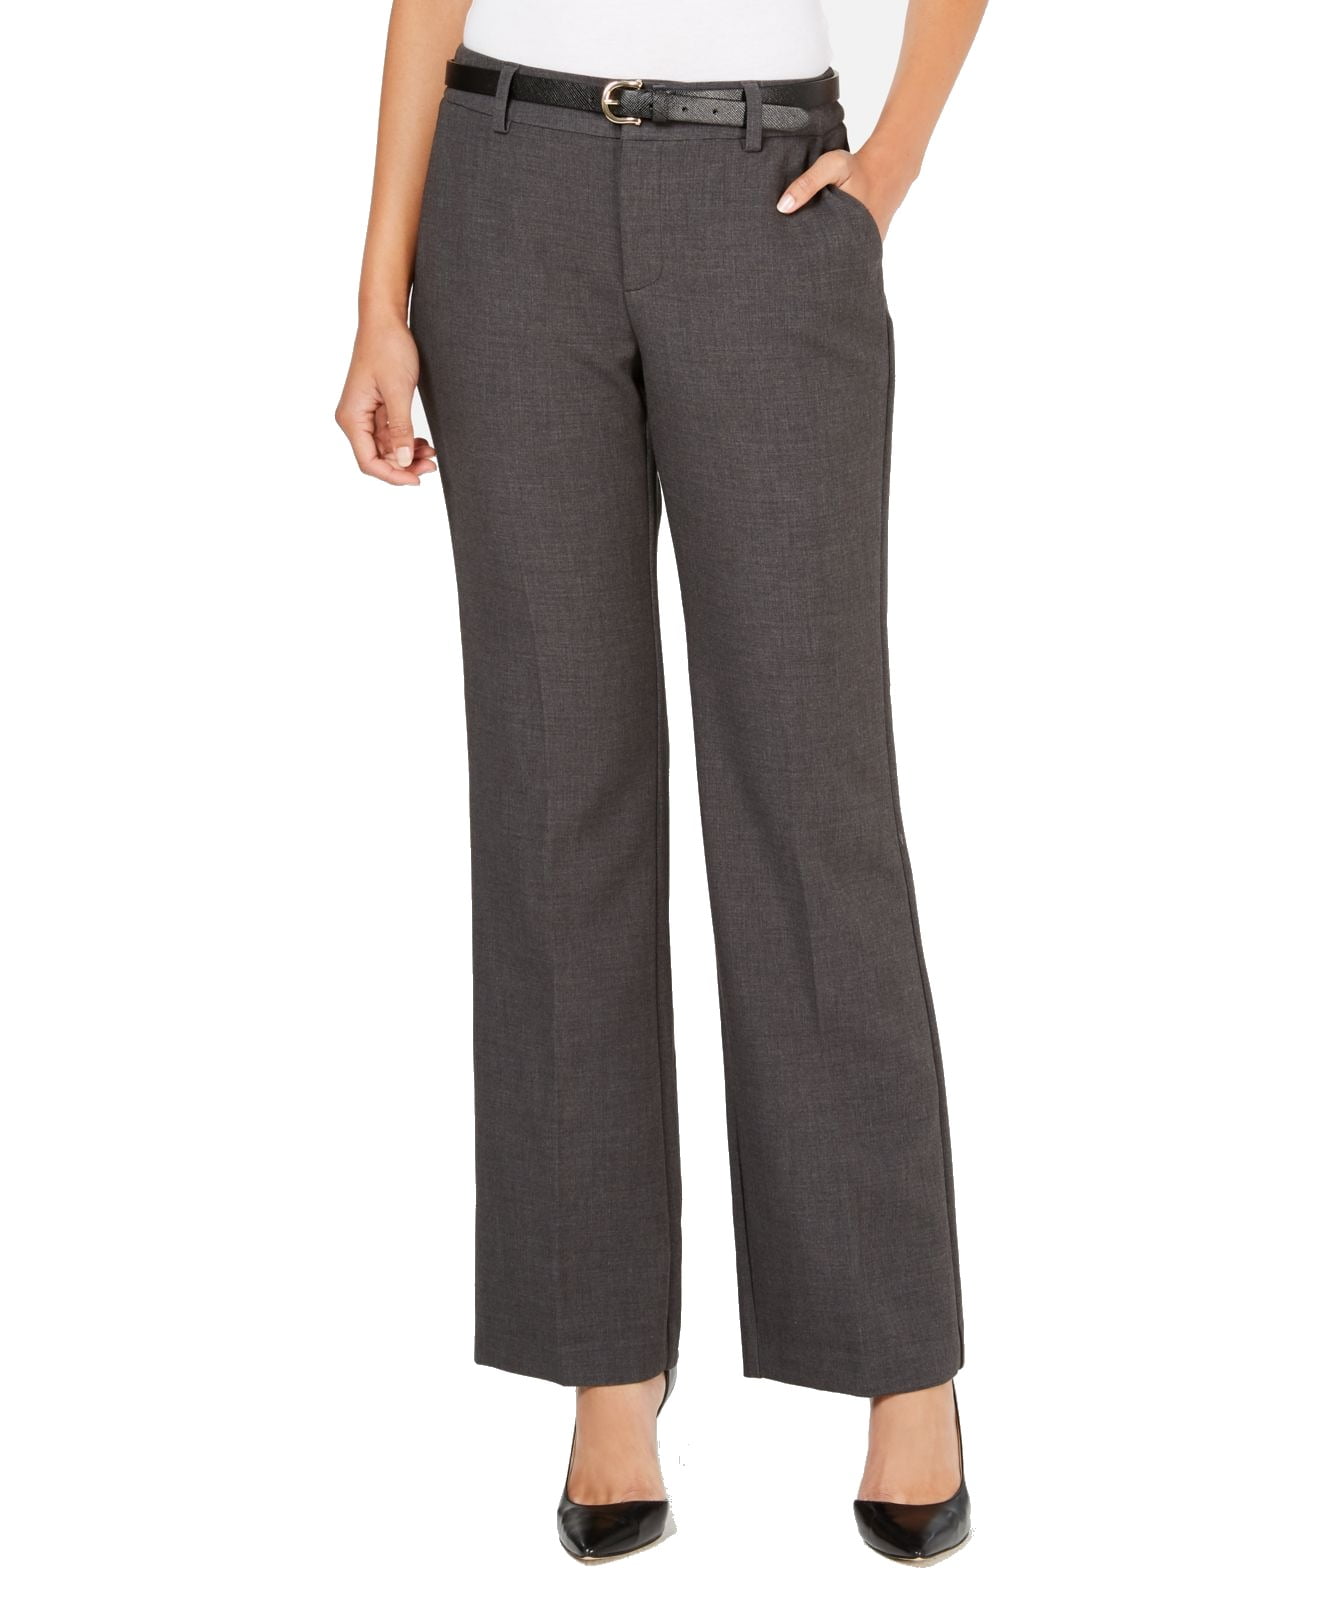 Charter Club Women's Dress Pants 8X32 Trousers Belted Stretch Gray 8 ...